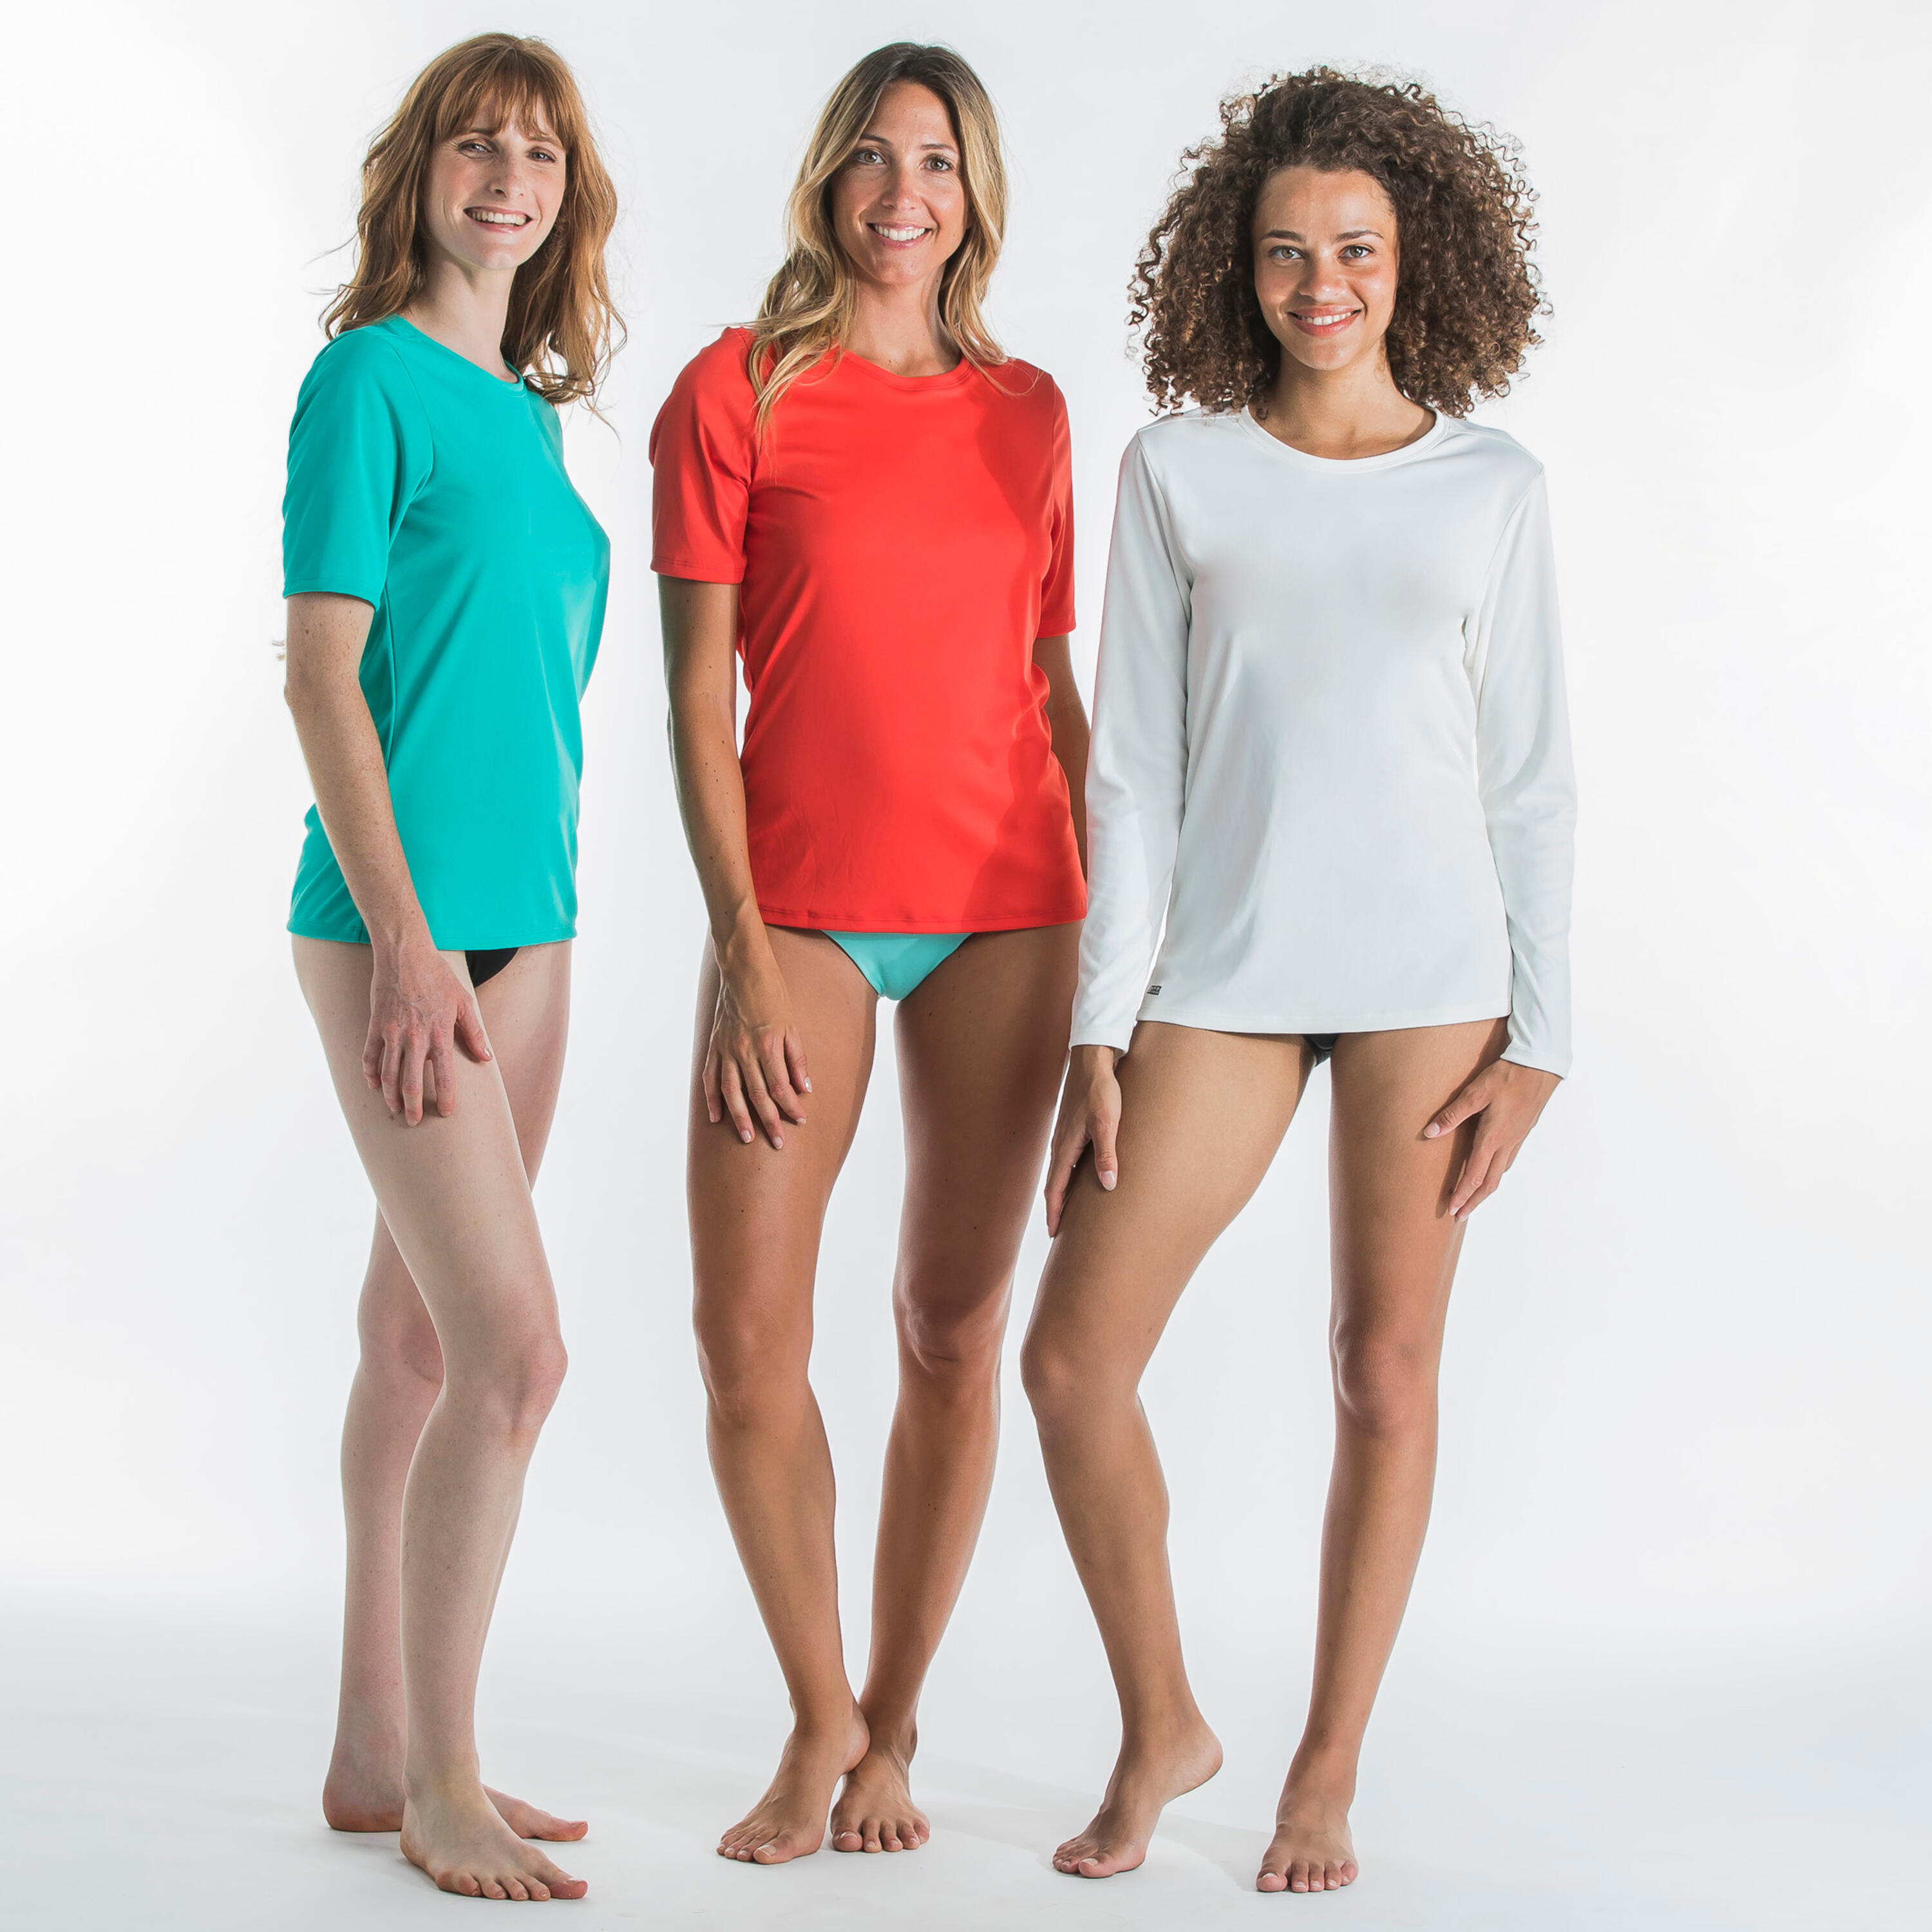 WOMEN’S SURFING LONG-SLEEVED UV-RESISTANT T-SHIRT MALOU GREIGE (UNDYED) 4/11